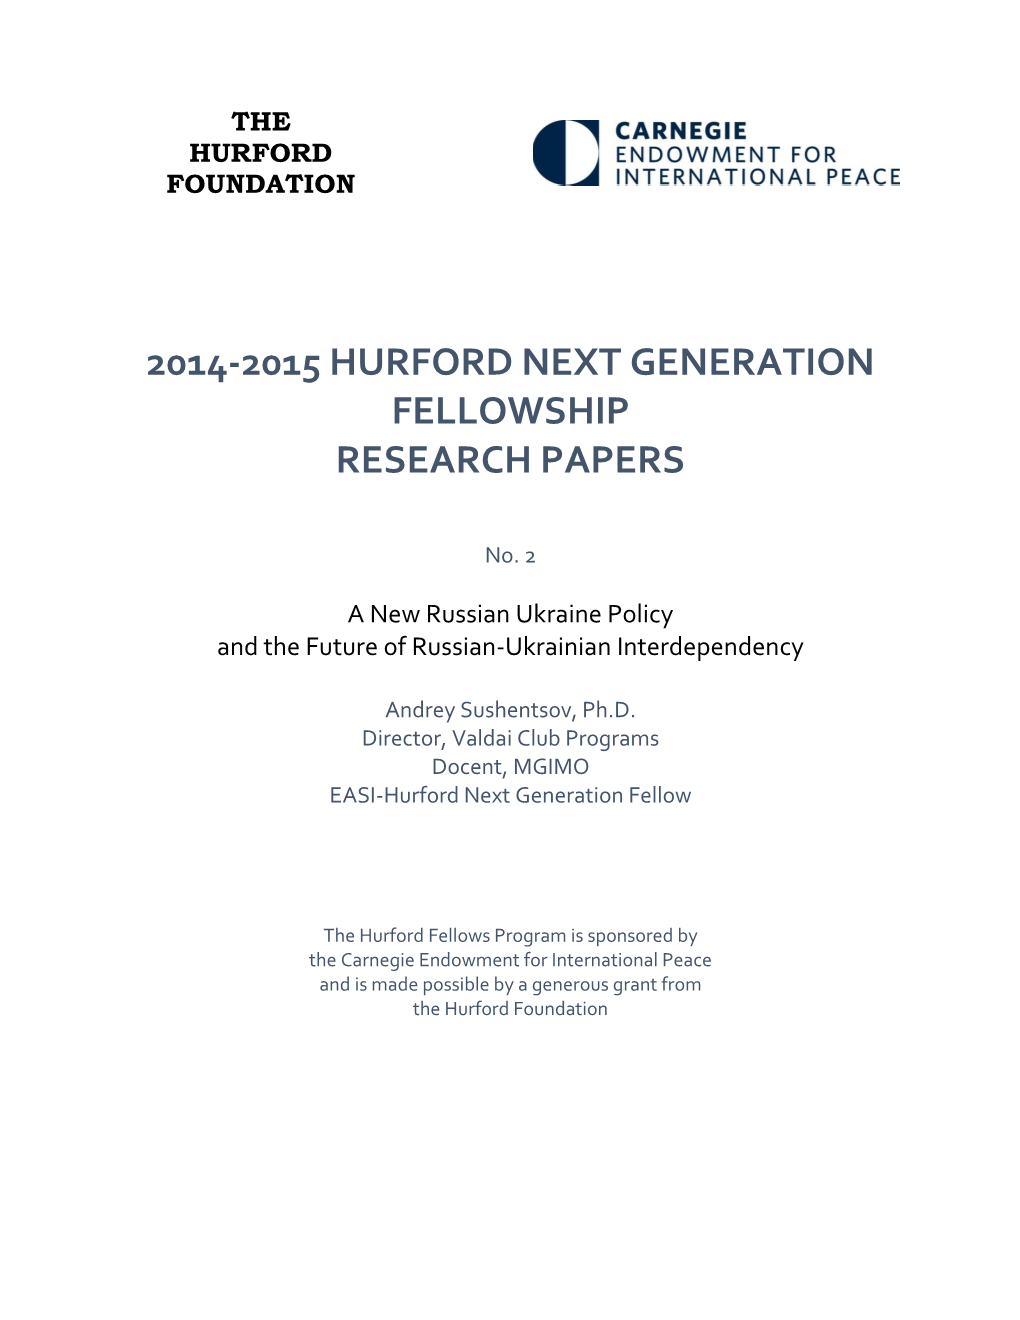 2014-2015 Hurford Next Generation Fellowship Research Papers